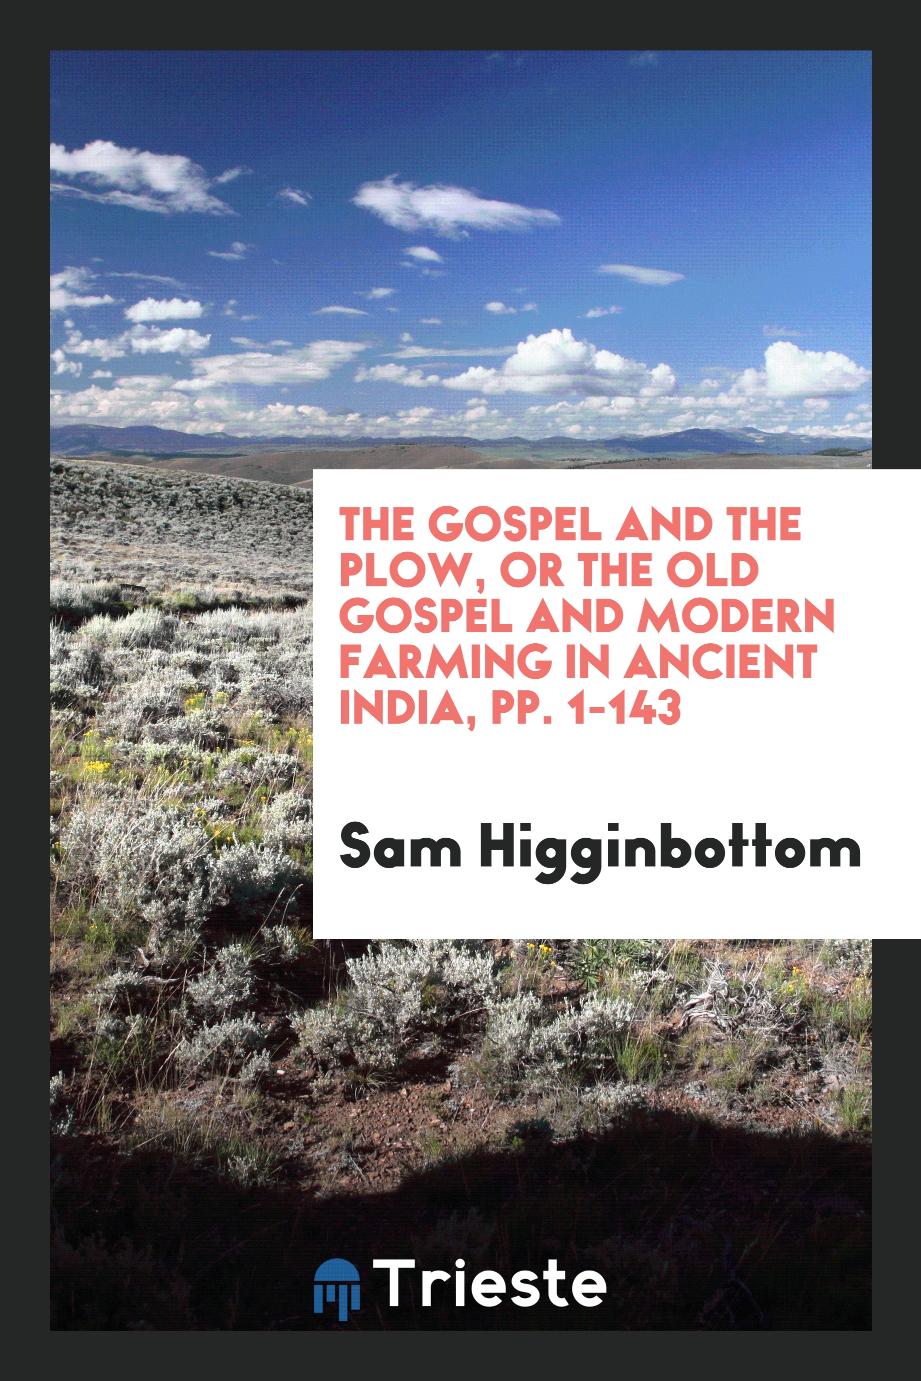 The Gospel and the Plow, or the Old Gospel and Modern Farming in Ancient India, pp. 1-143